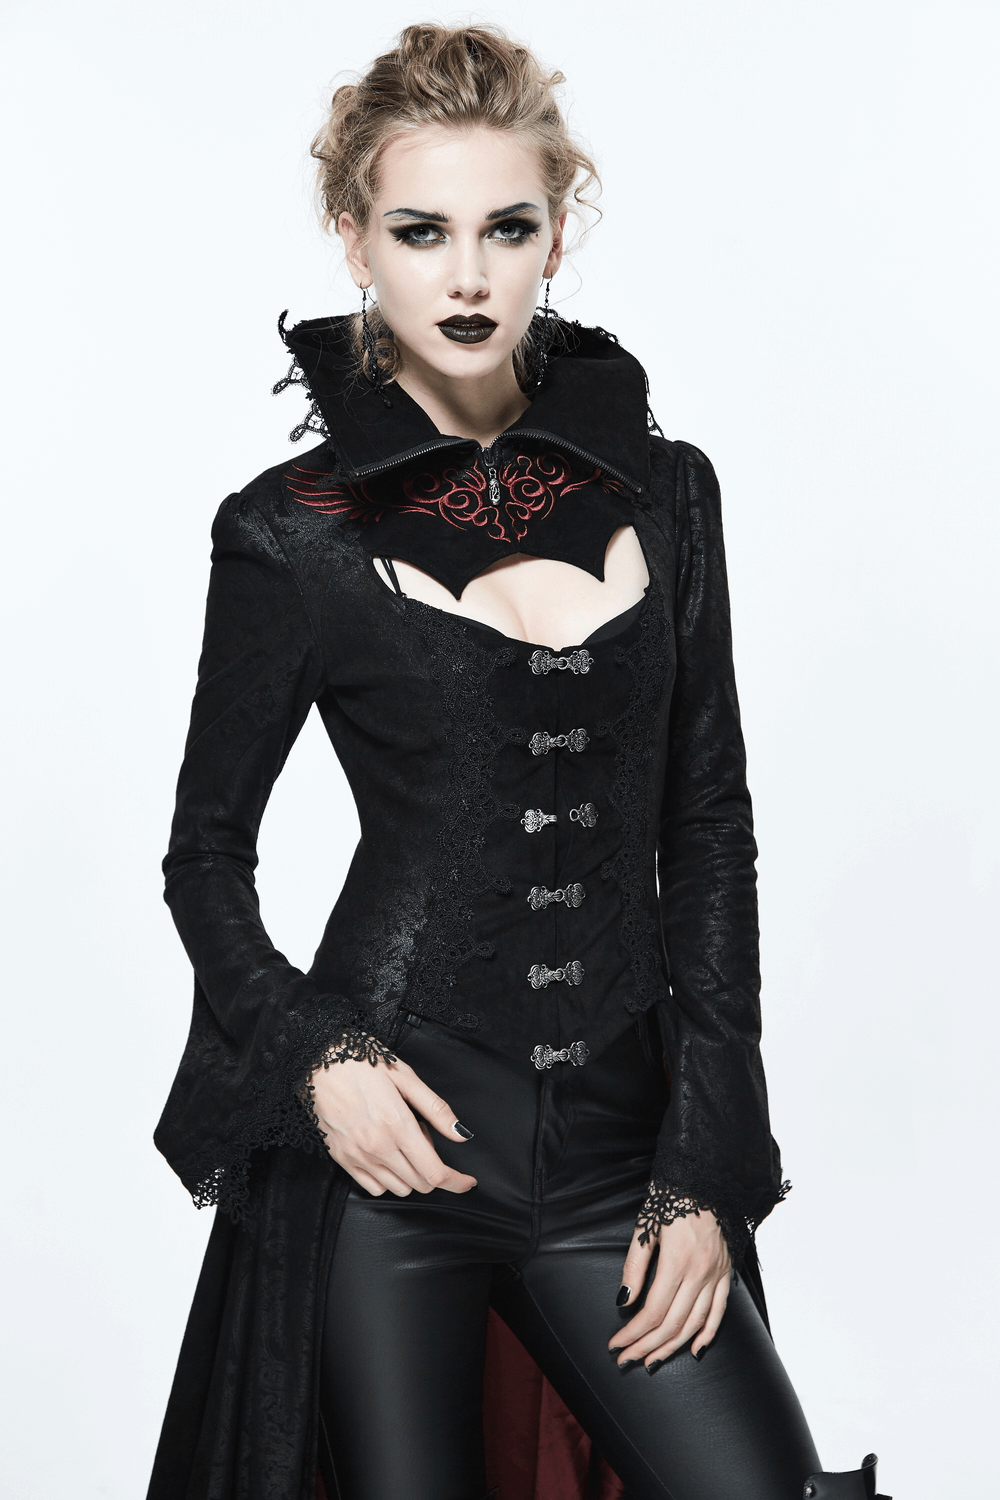 Black And Red Embossed Long Coat in Gothic Style / Sexy High Collar Long Top / Alternative Fashion